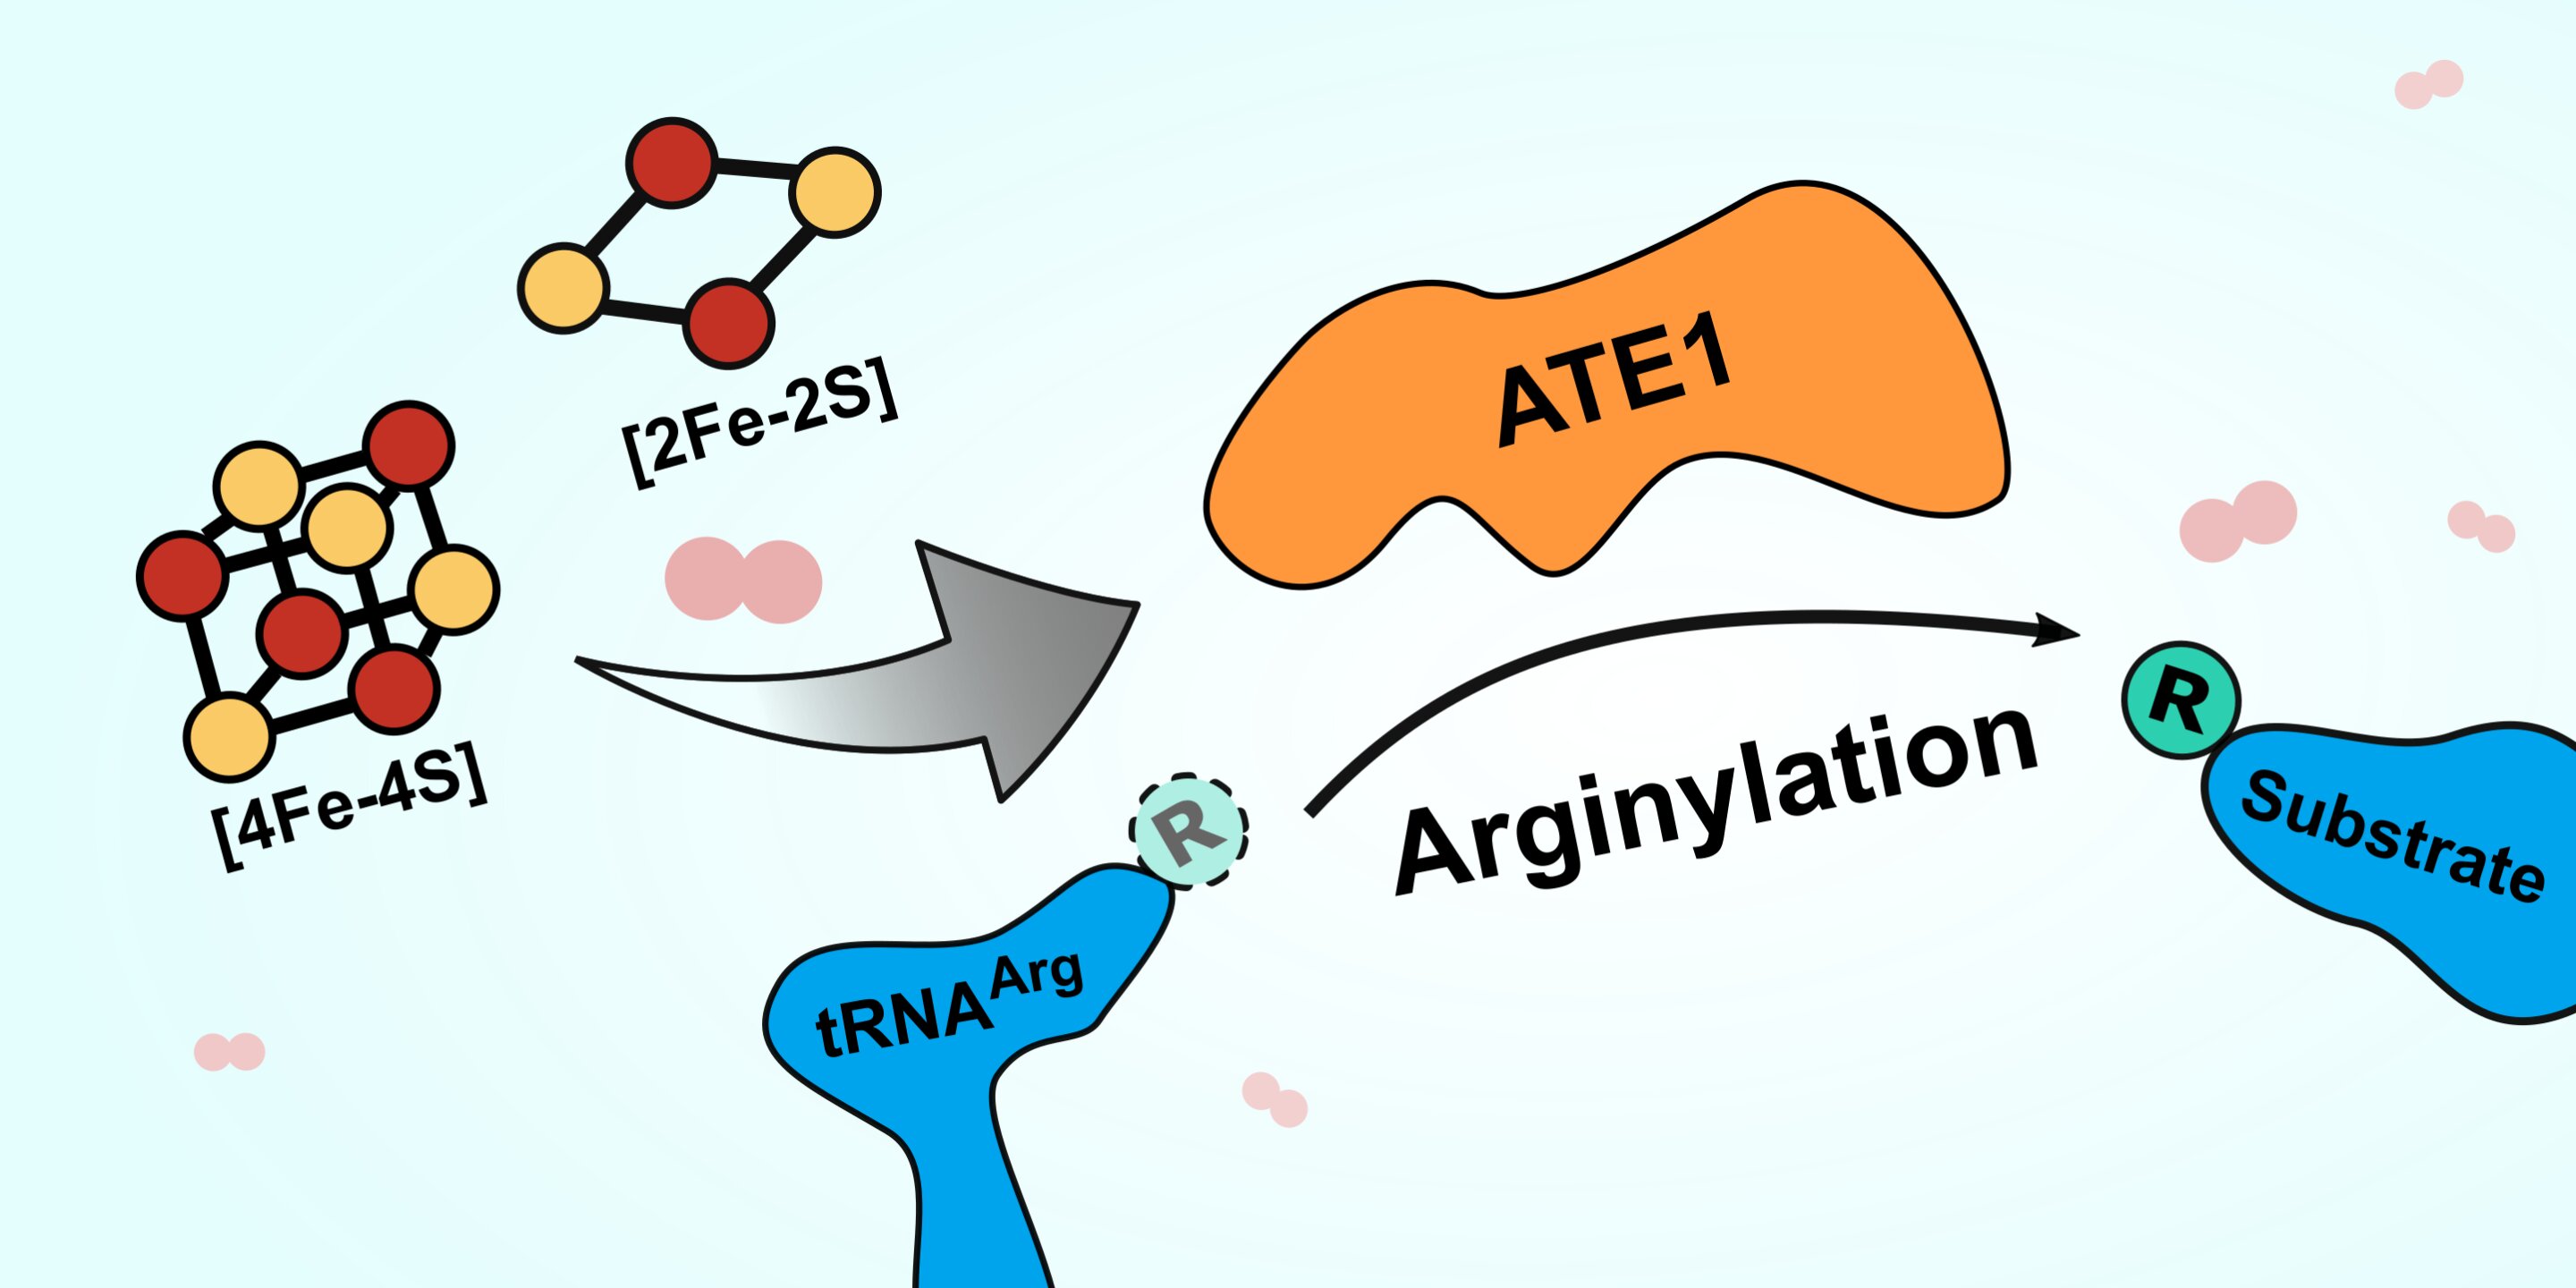 Enzyme ATE1 plays role in cellular stress response, opening door to new therapeutic targets